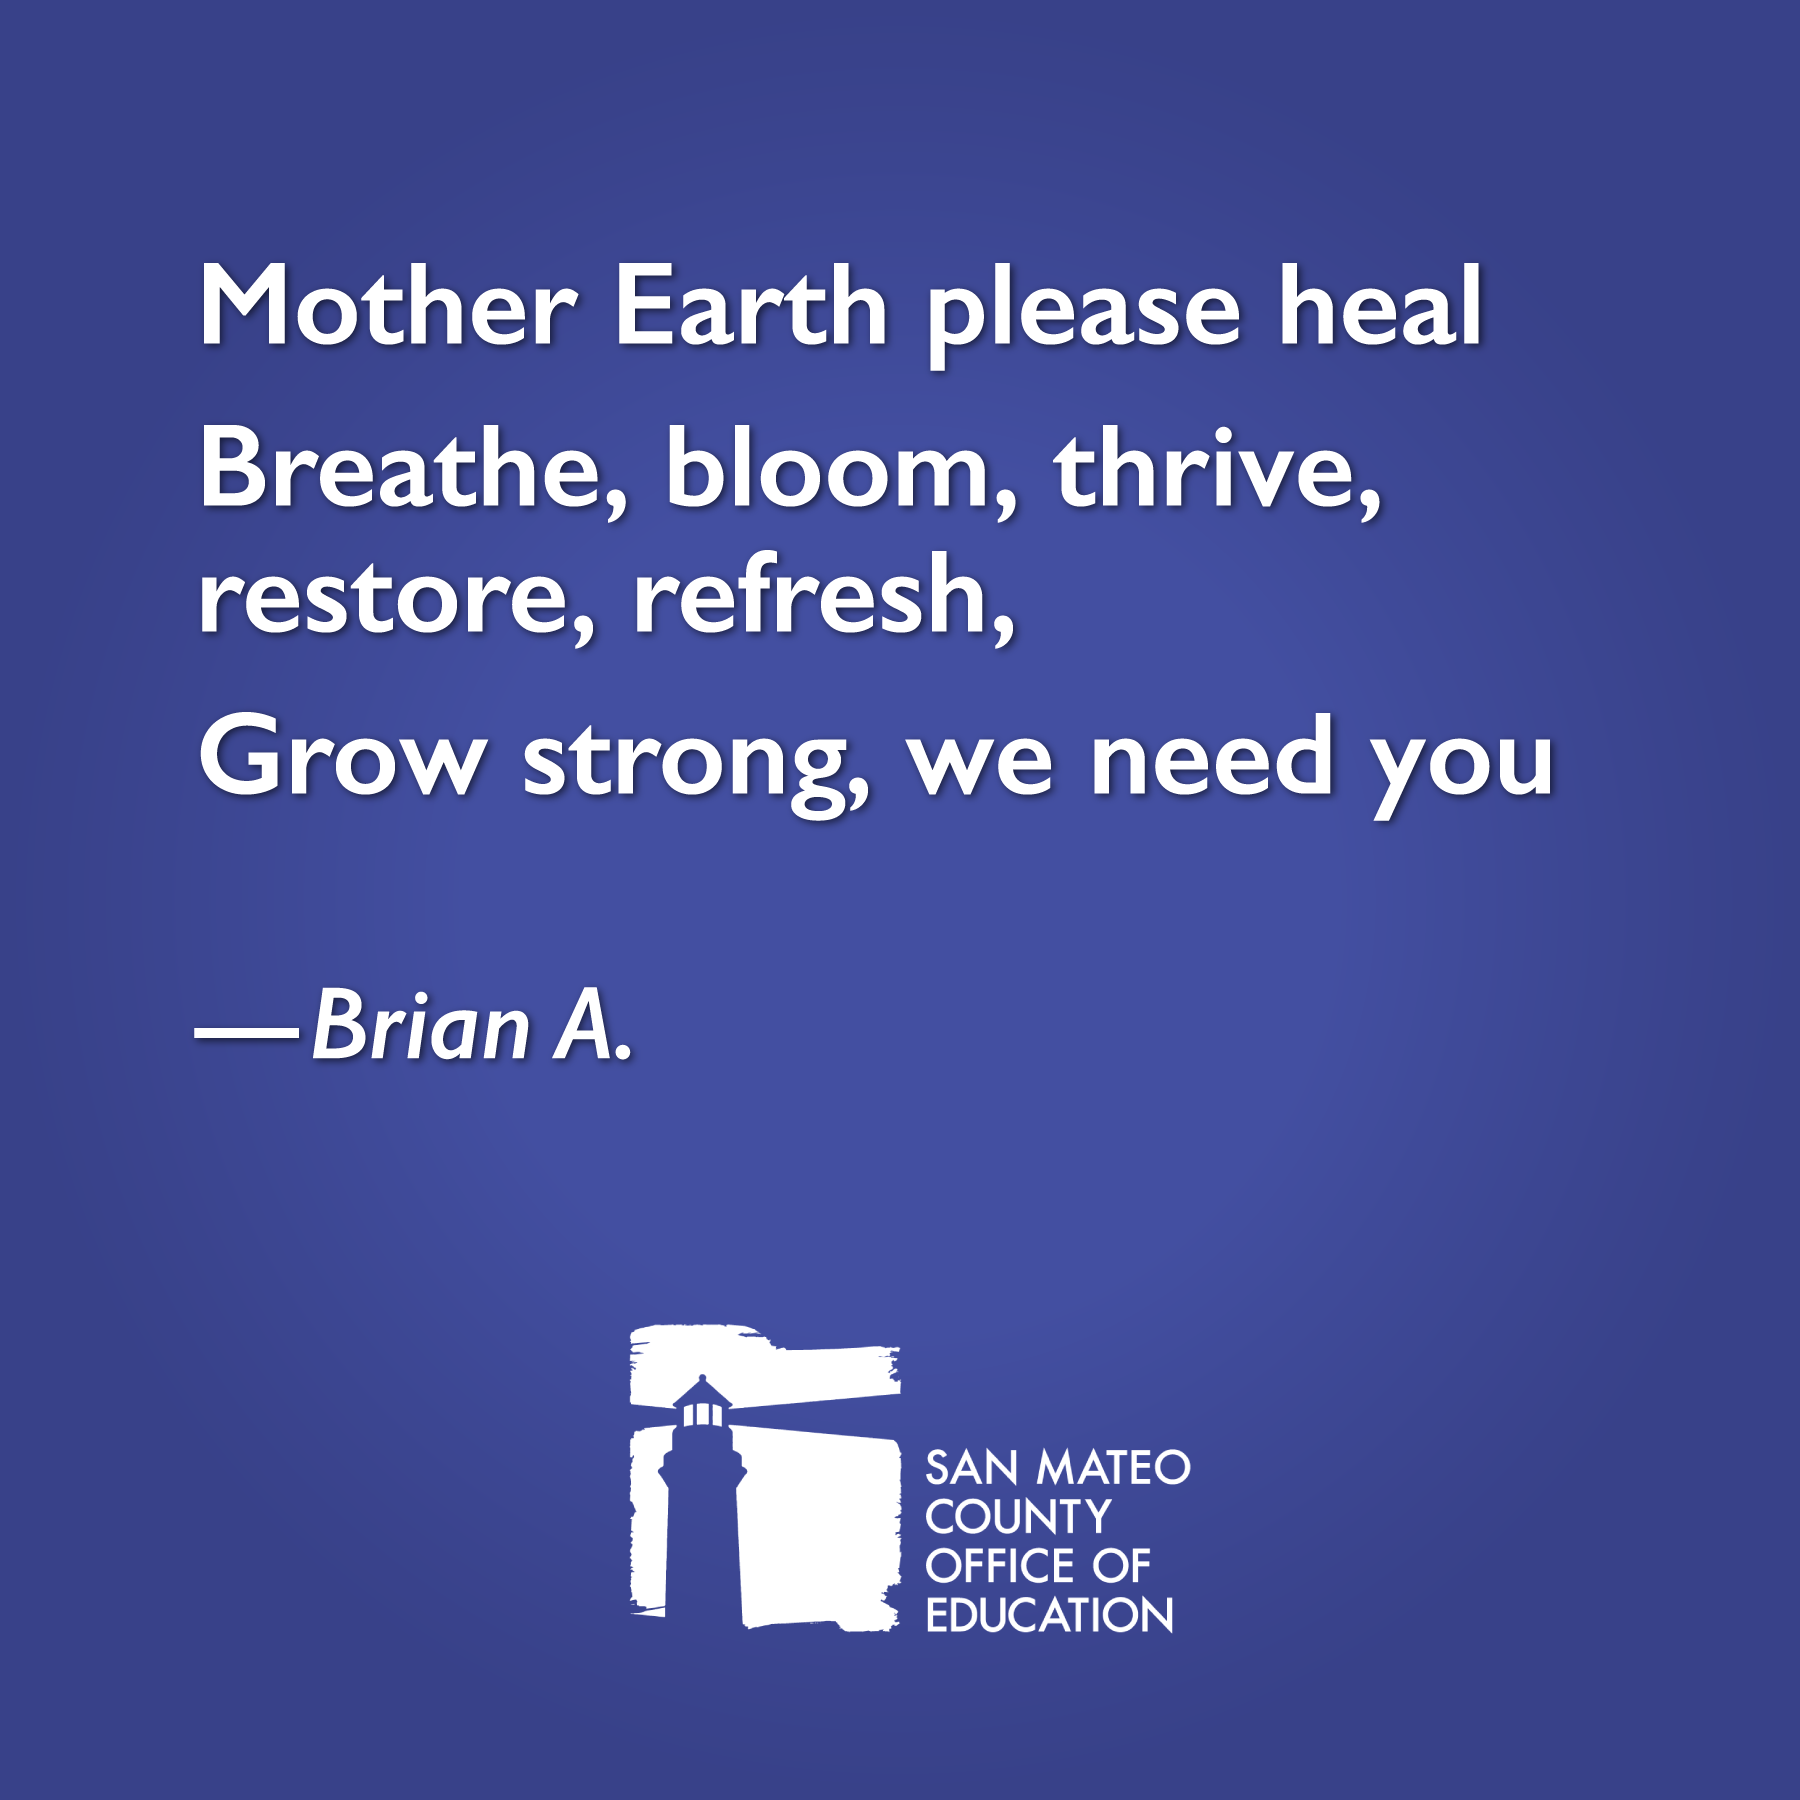 Mother Earth please heal Breathe, bloom, thrive, restore, refresh, Grow strong, we need you. Written by Brian A.